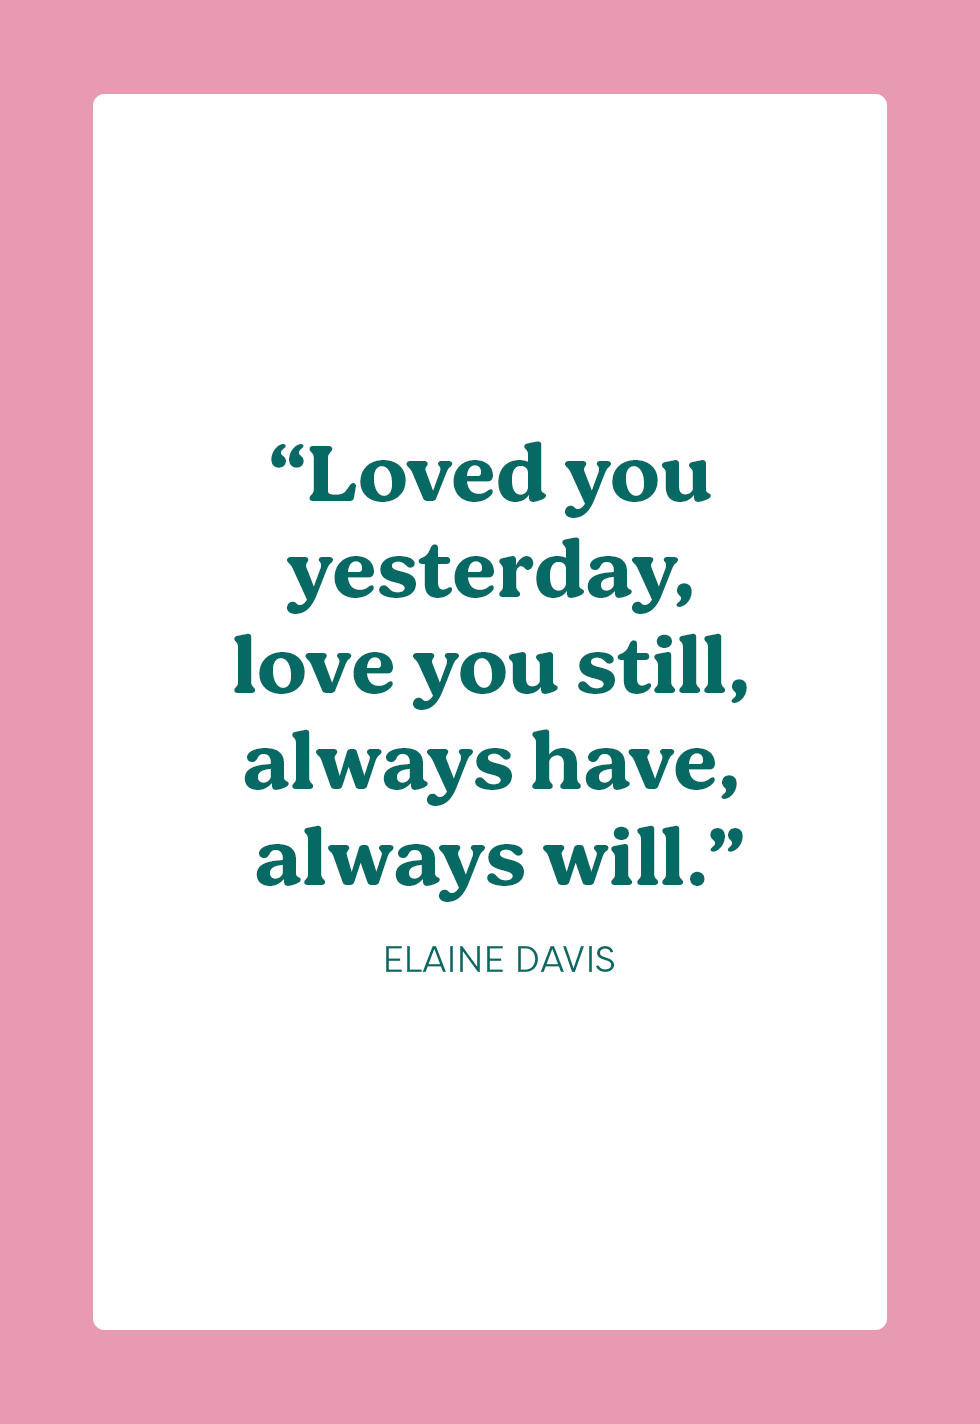 75 Love Quotes - Famous Sayings About Love